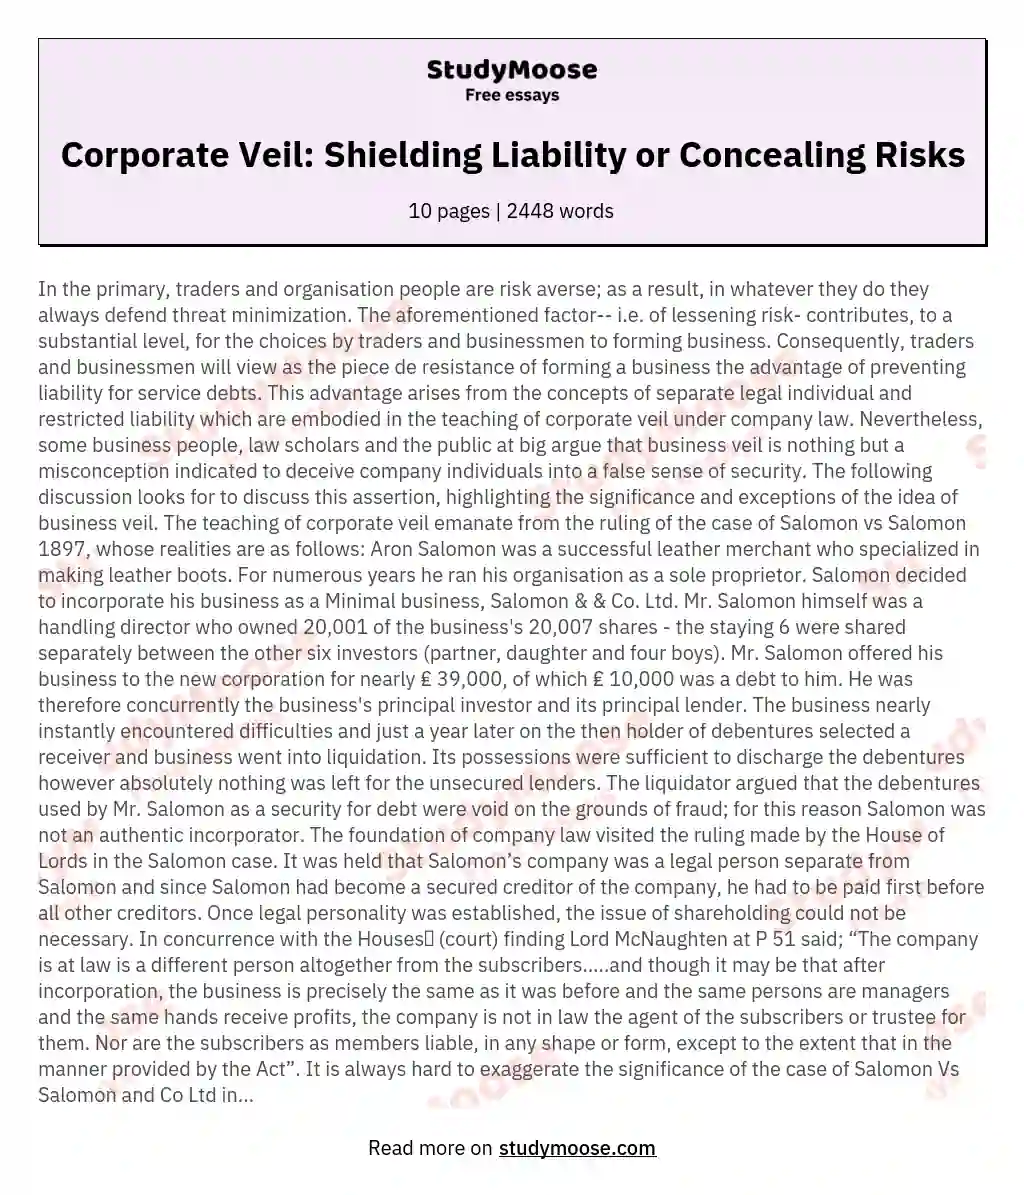 Corporate Veil: Shielding Liability or Concealing Risks essay